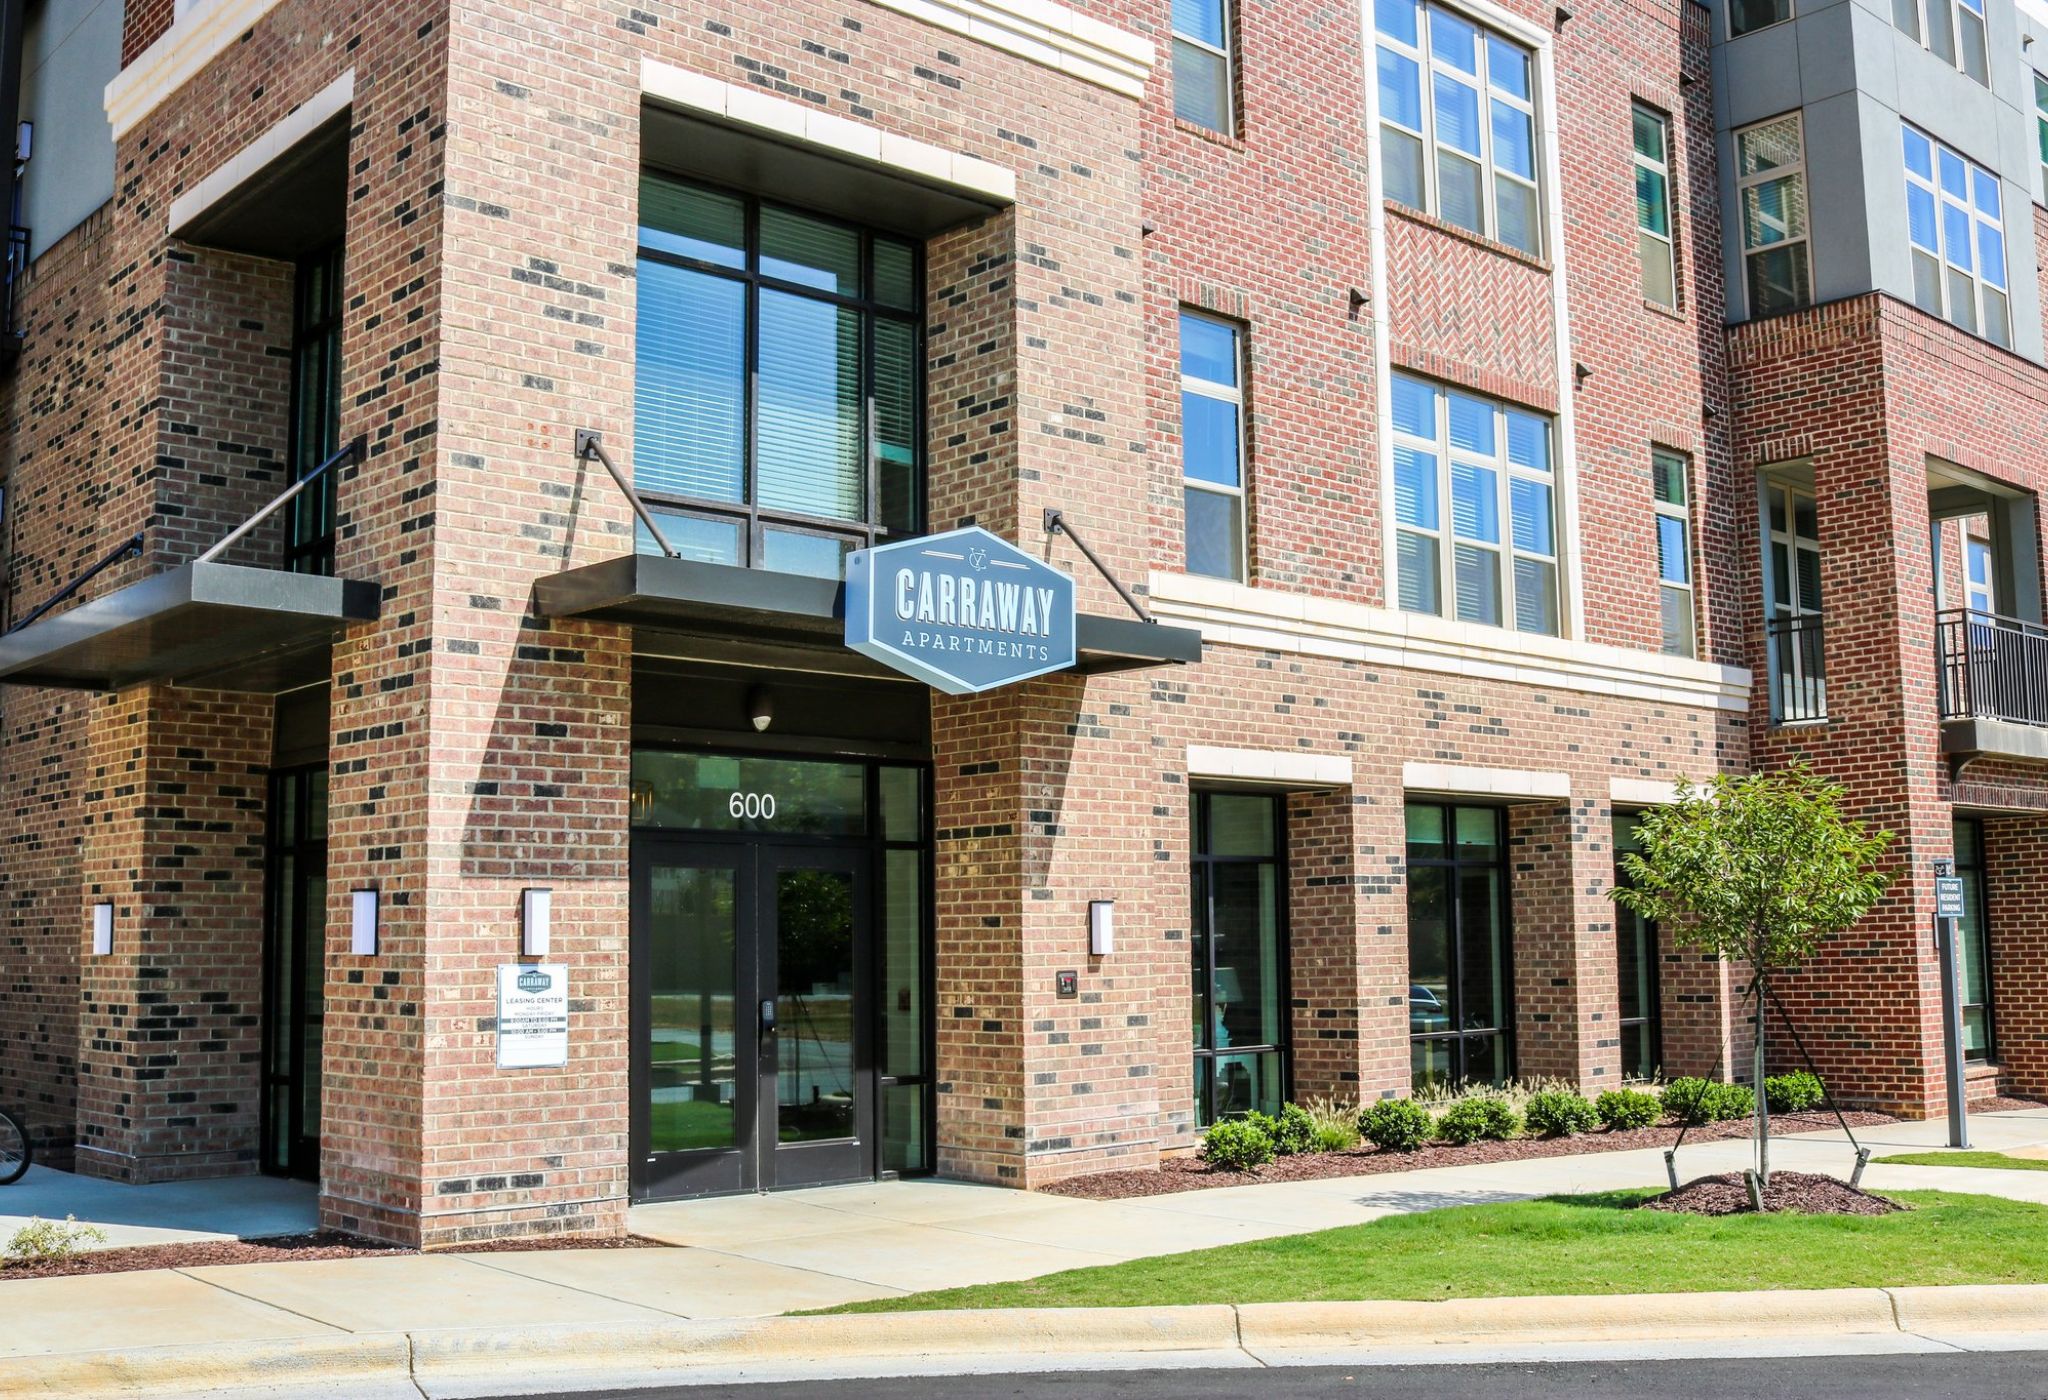 Exterior entrance to Carraway Village Apartments in Chapel Hill, NC